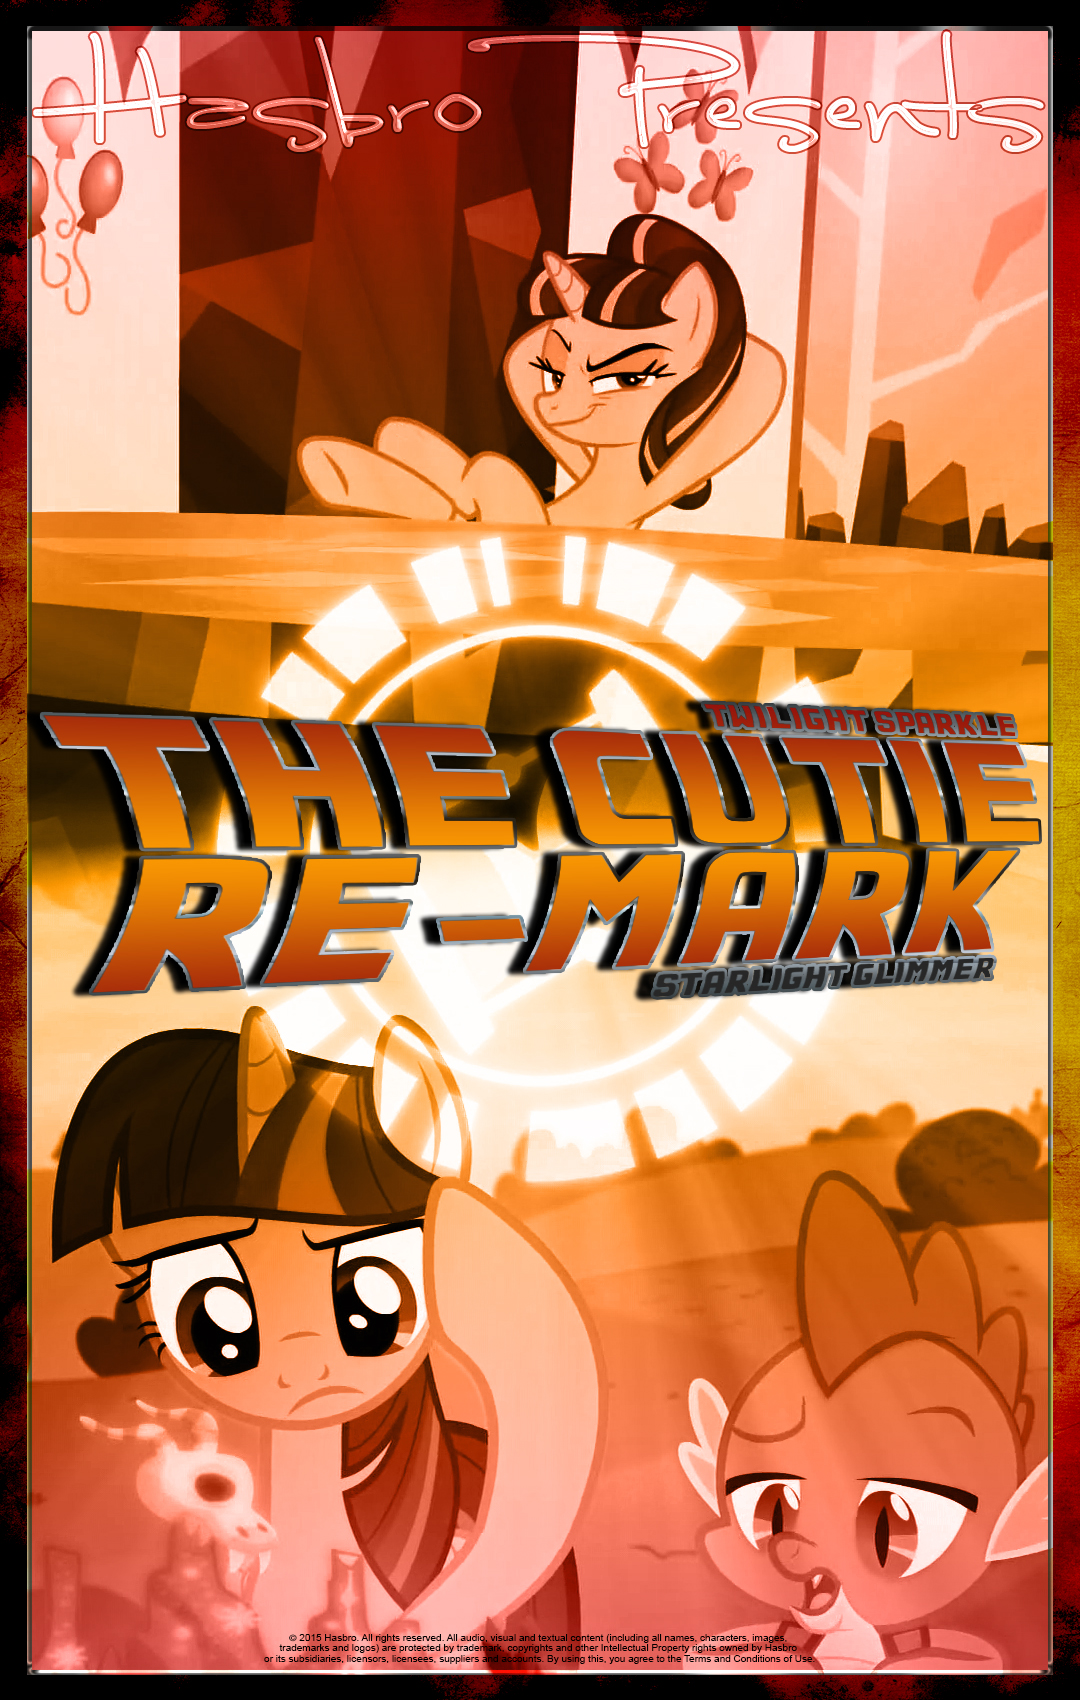 mlp___the_cutie_re_mark___movie_poster_by_pims1978-d9ifqkp.jpg